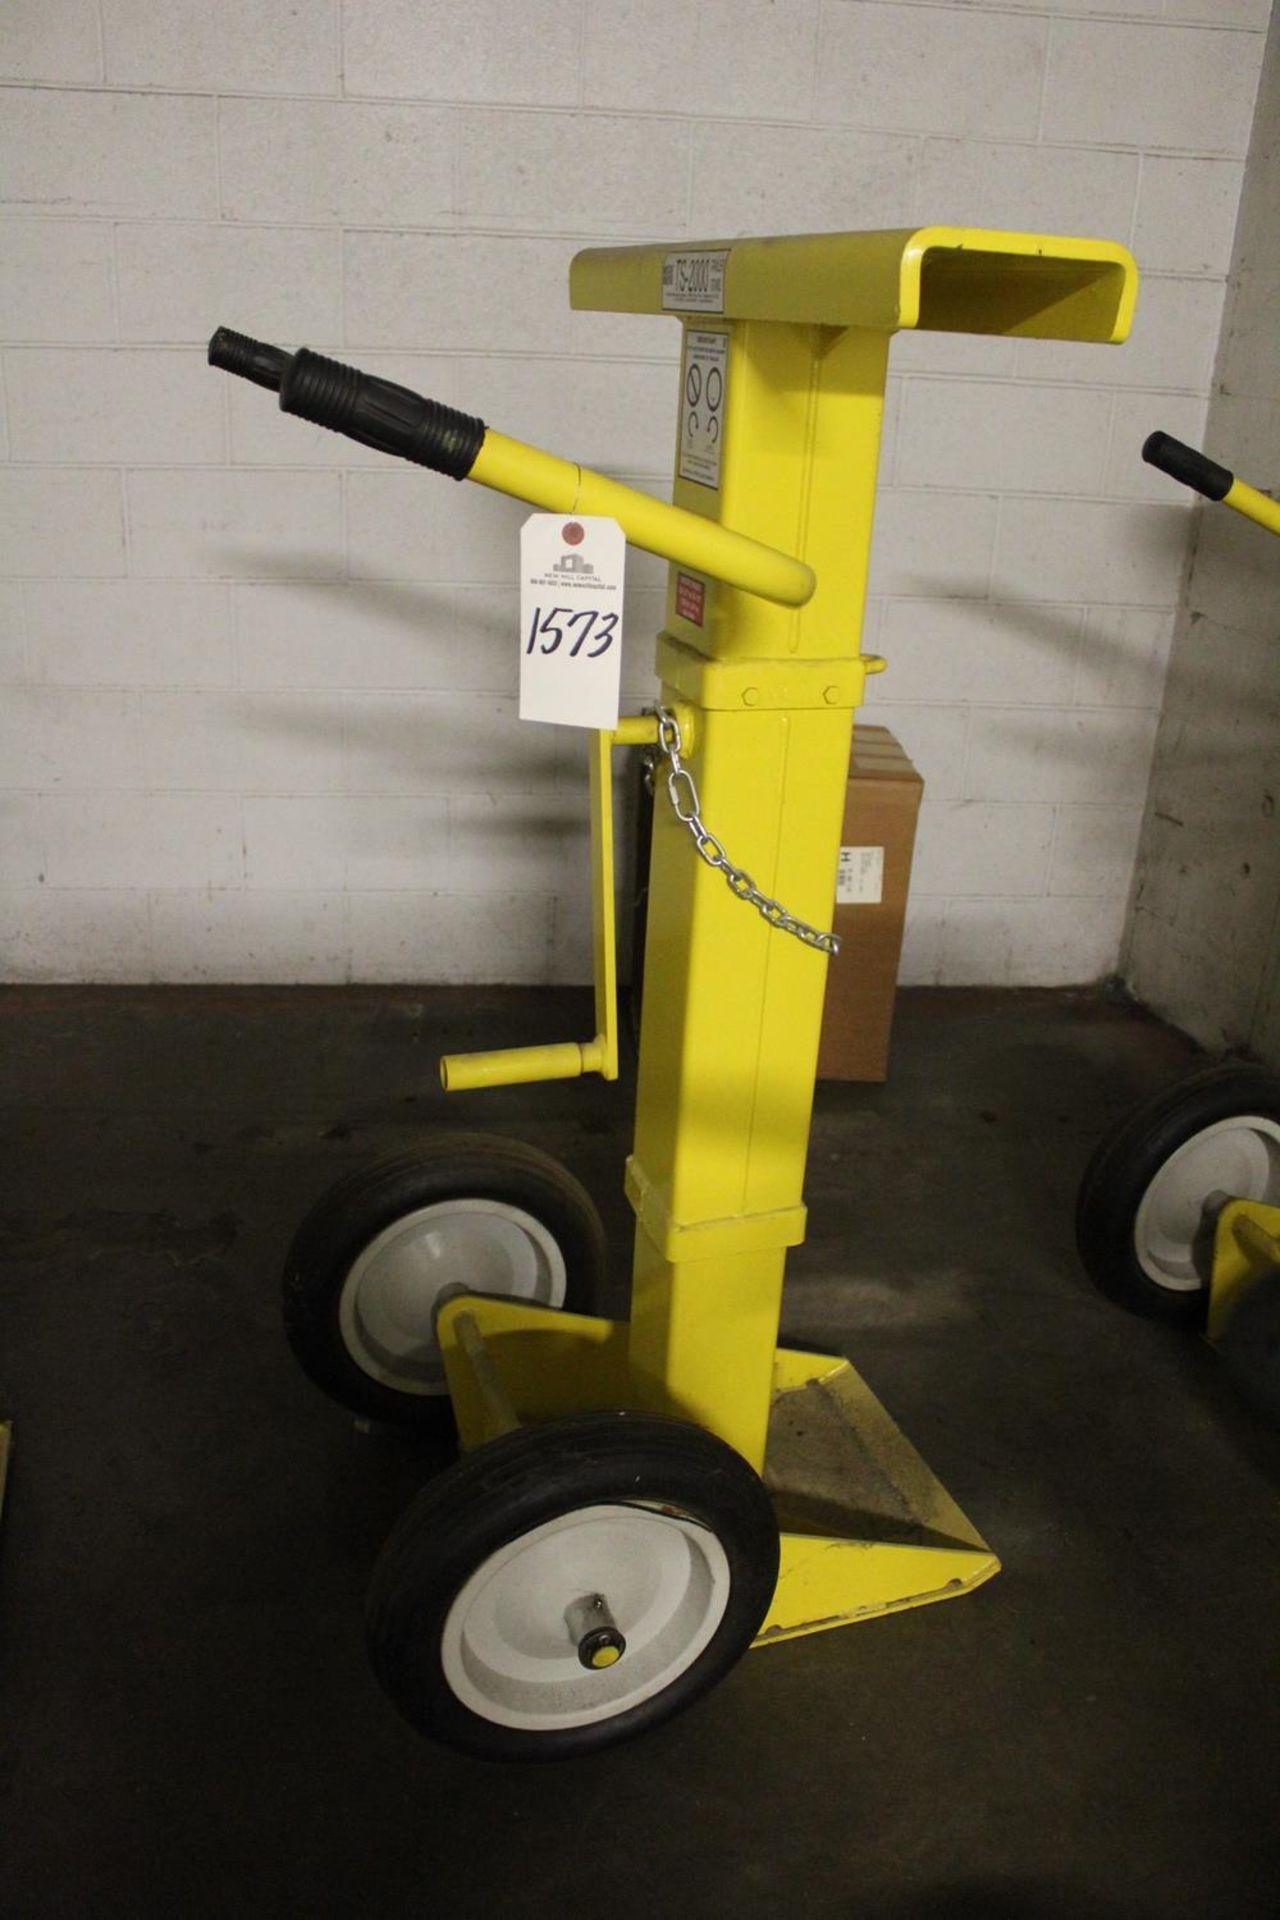 Rite Hite TS-2000 Trailer Stand - Subject to Bulk Bid Lot 15 | Rig Fee: Hand Carry or Contact Rigger